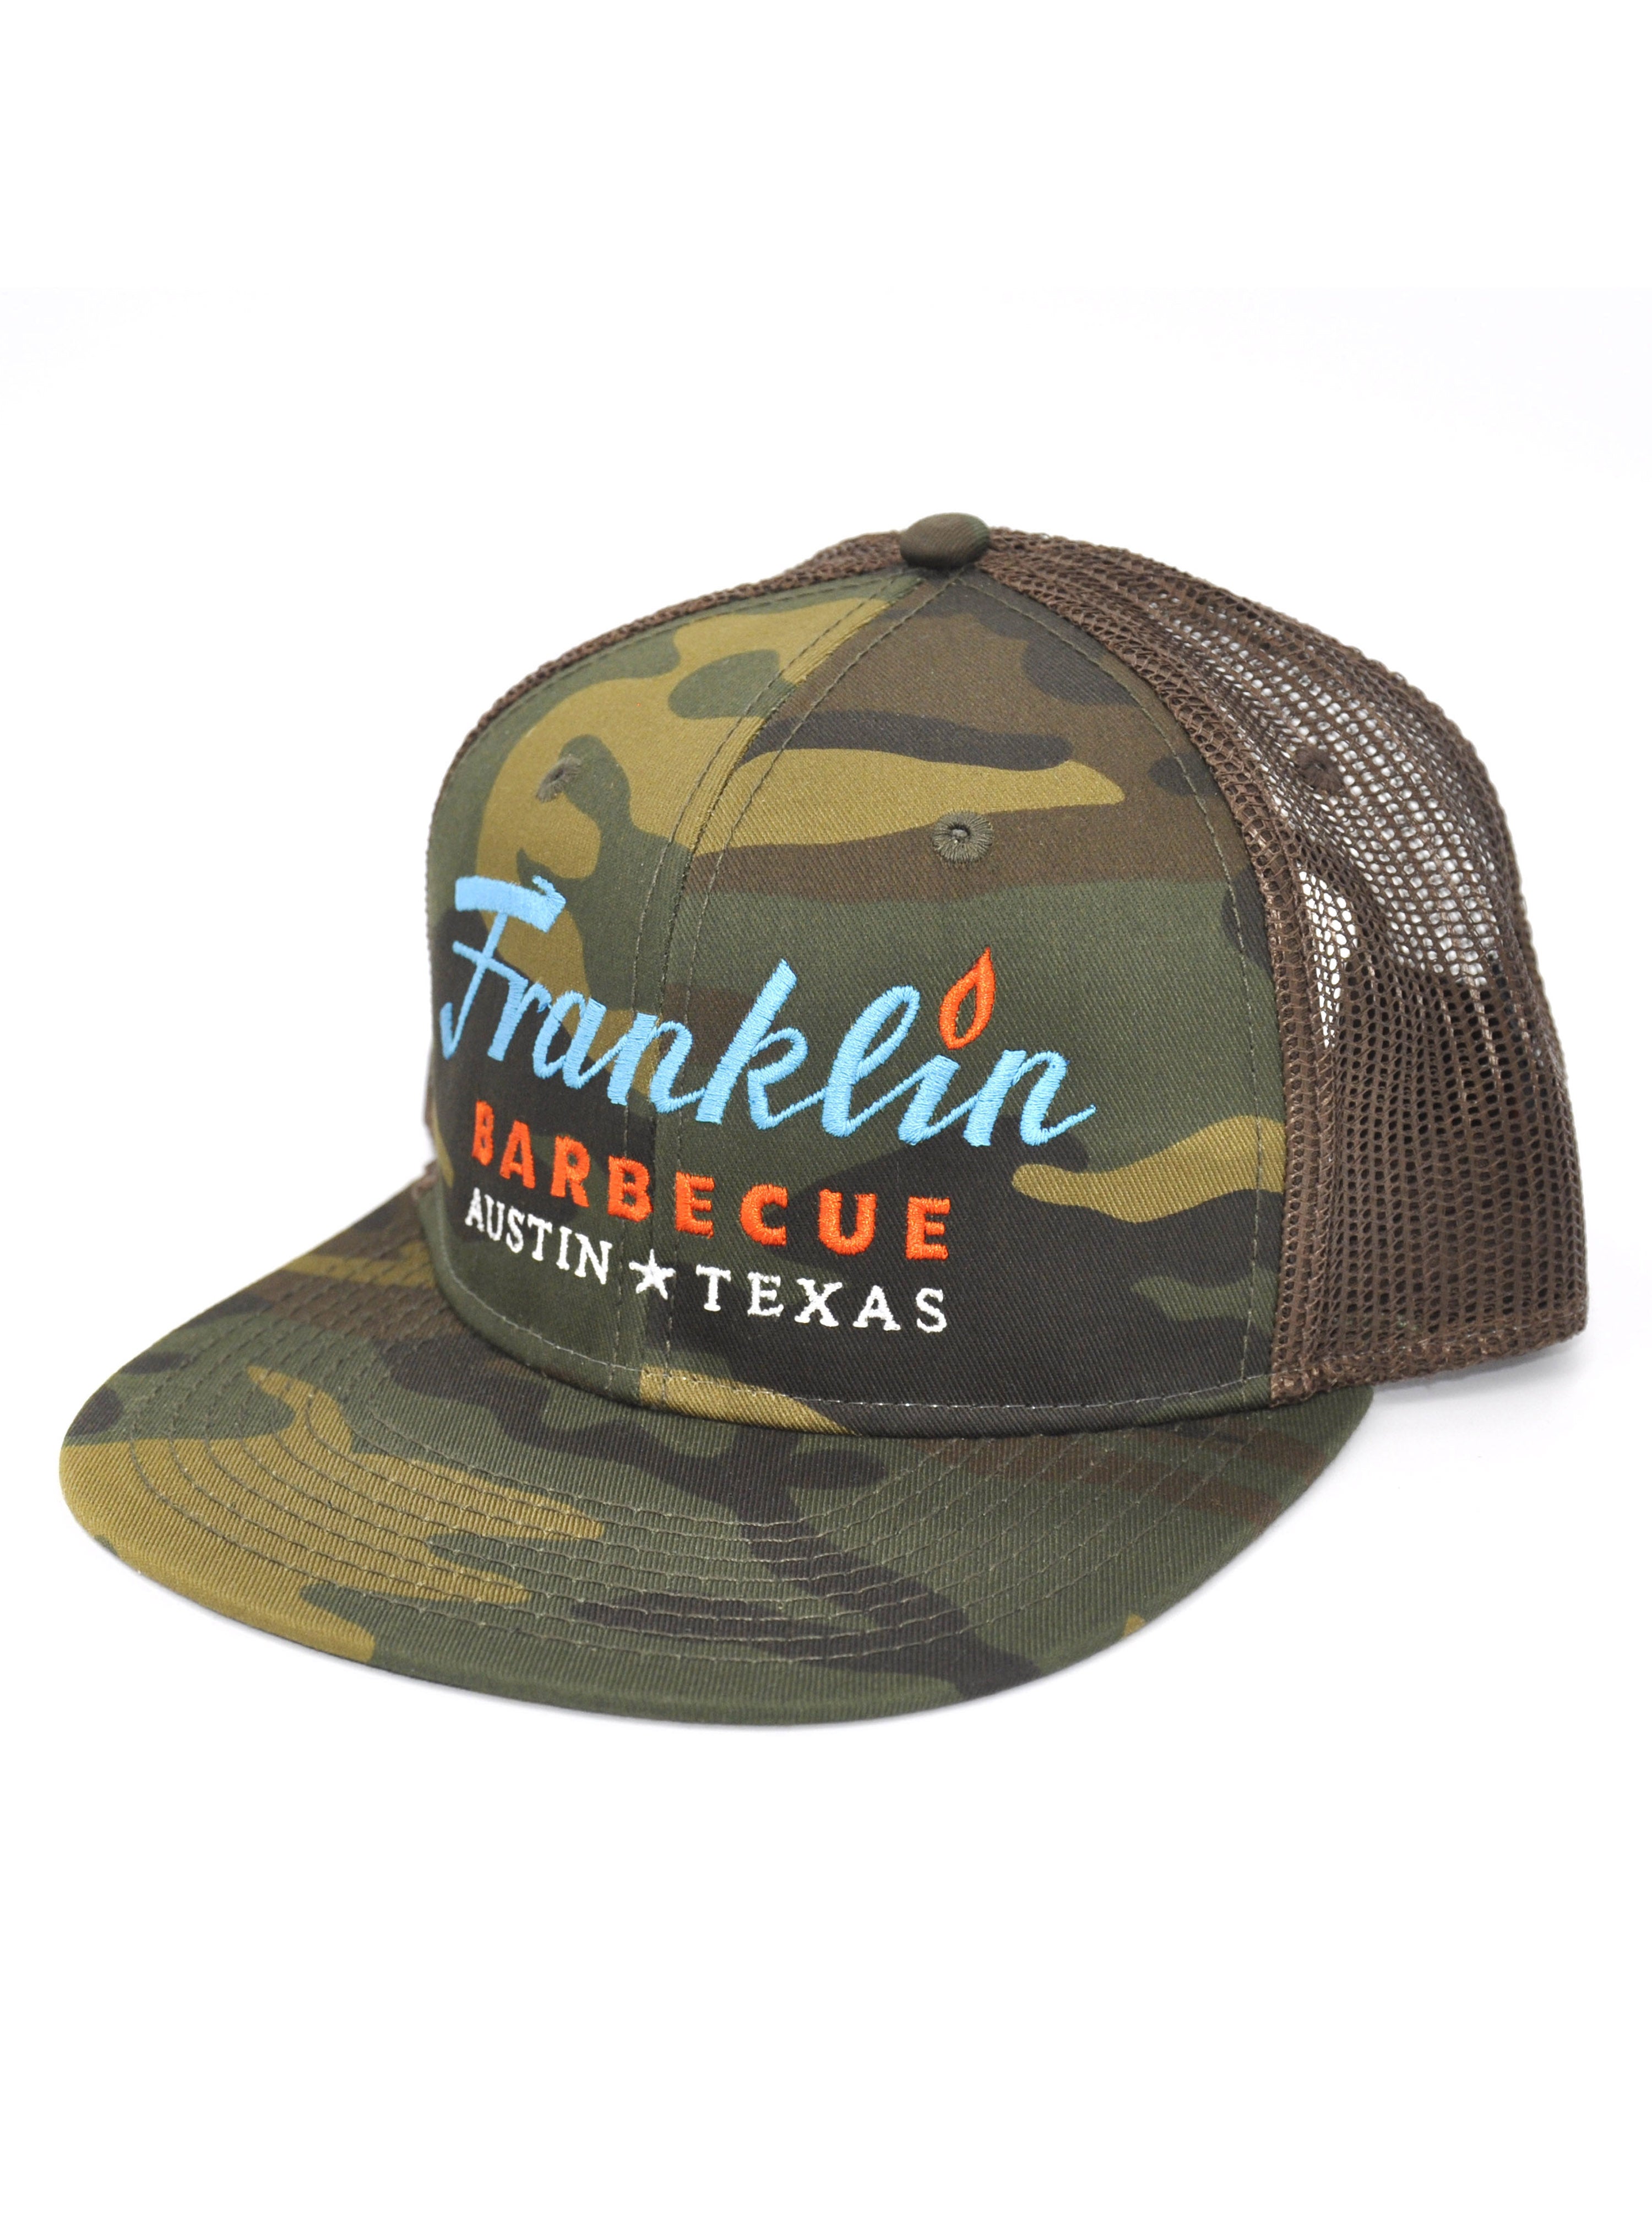 Alternate angle that shows the mesh backing of Camouflage cap with Franklin Barbecue text logo in blue and orange. Below that is Austin Texas in white. 